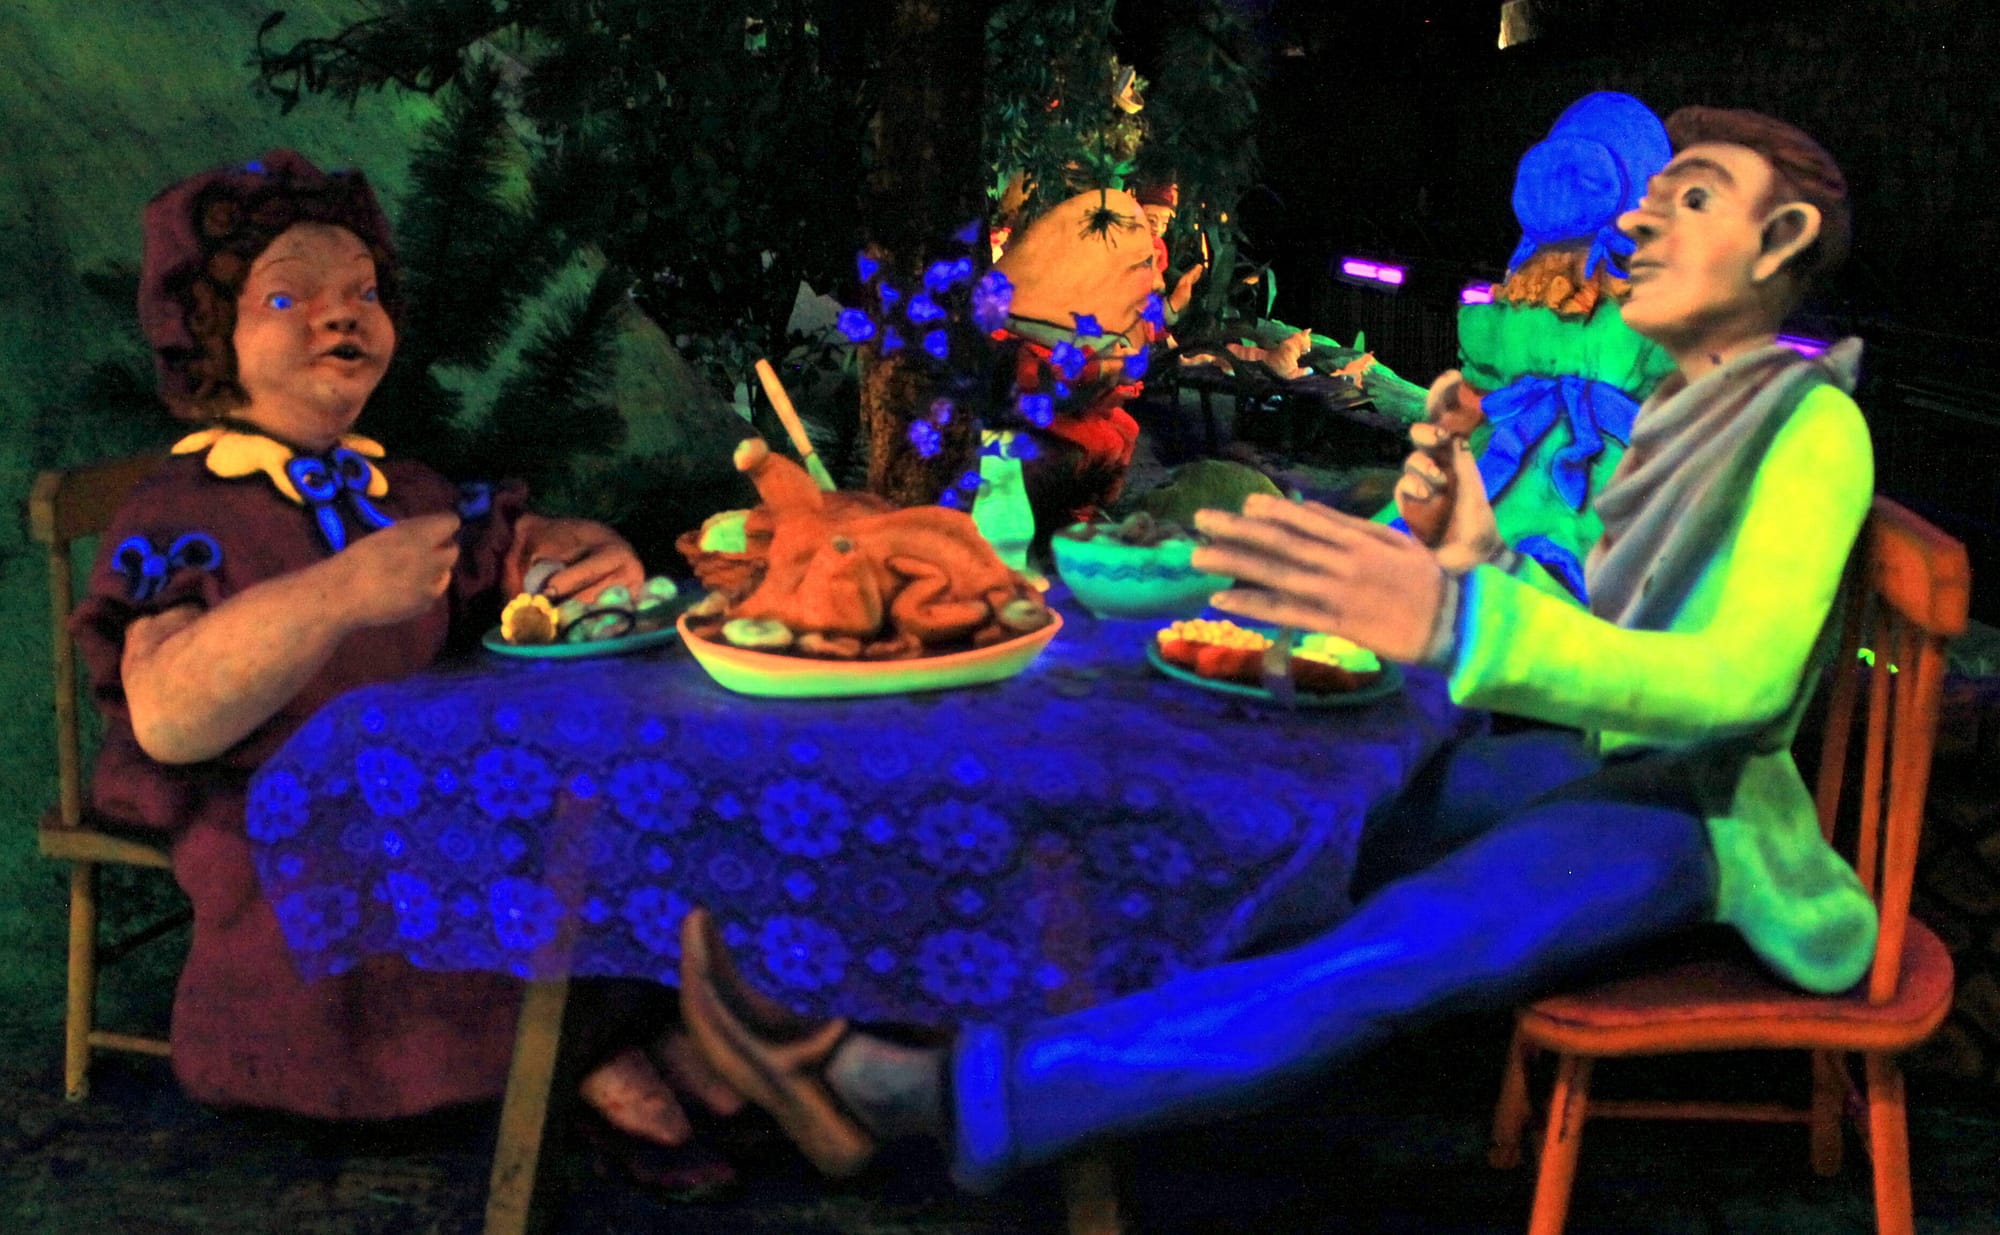 photo of a glow-in-the-dark scene from a popular fairy tale